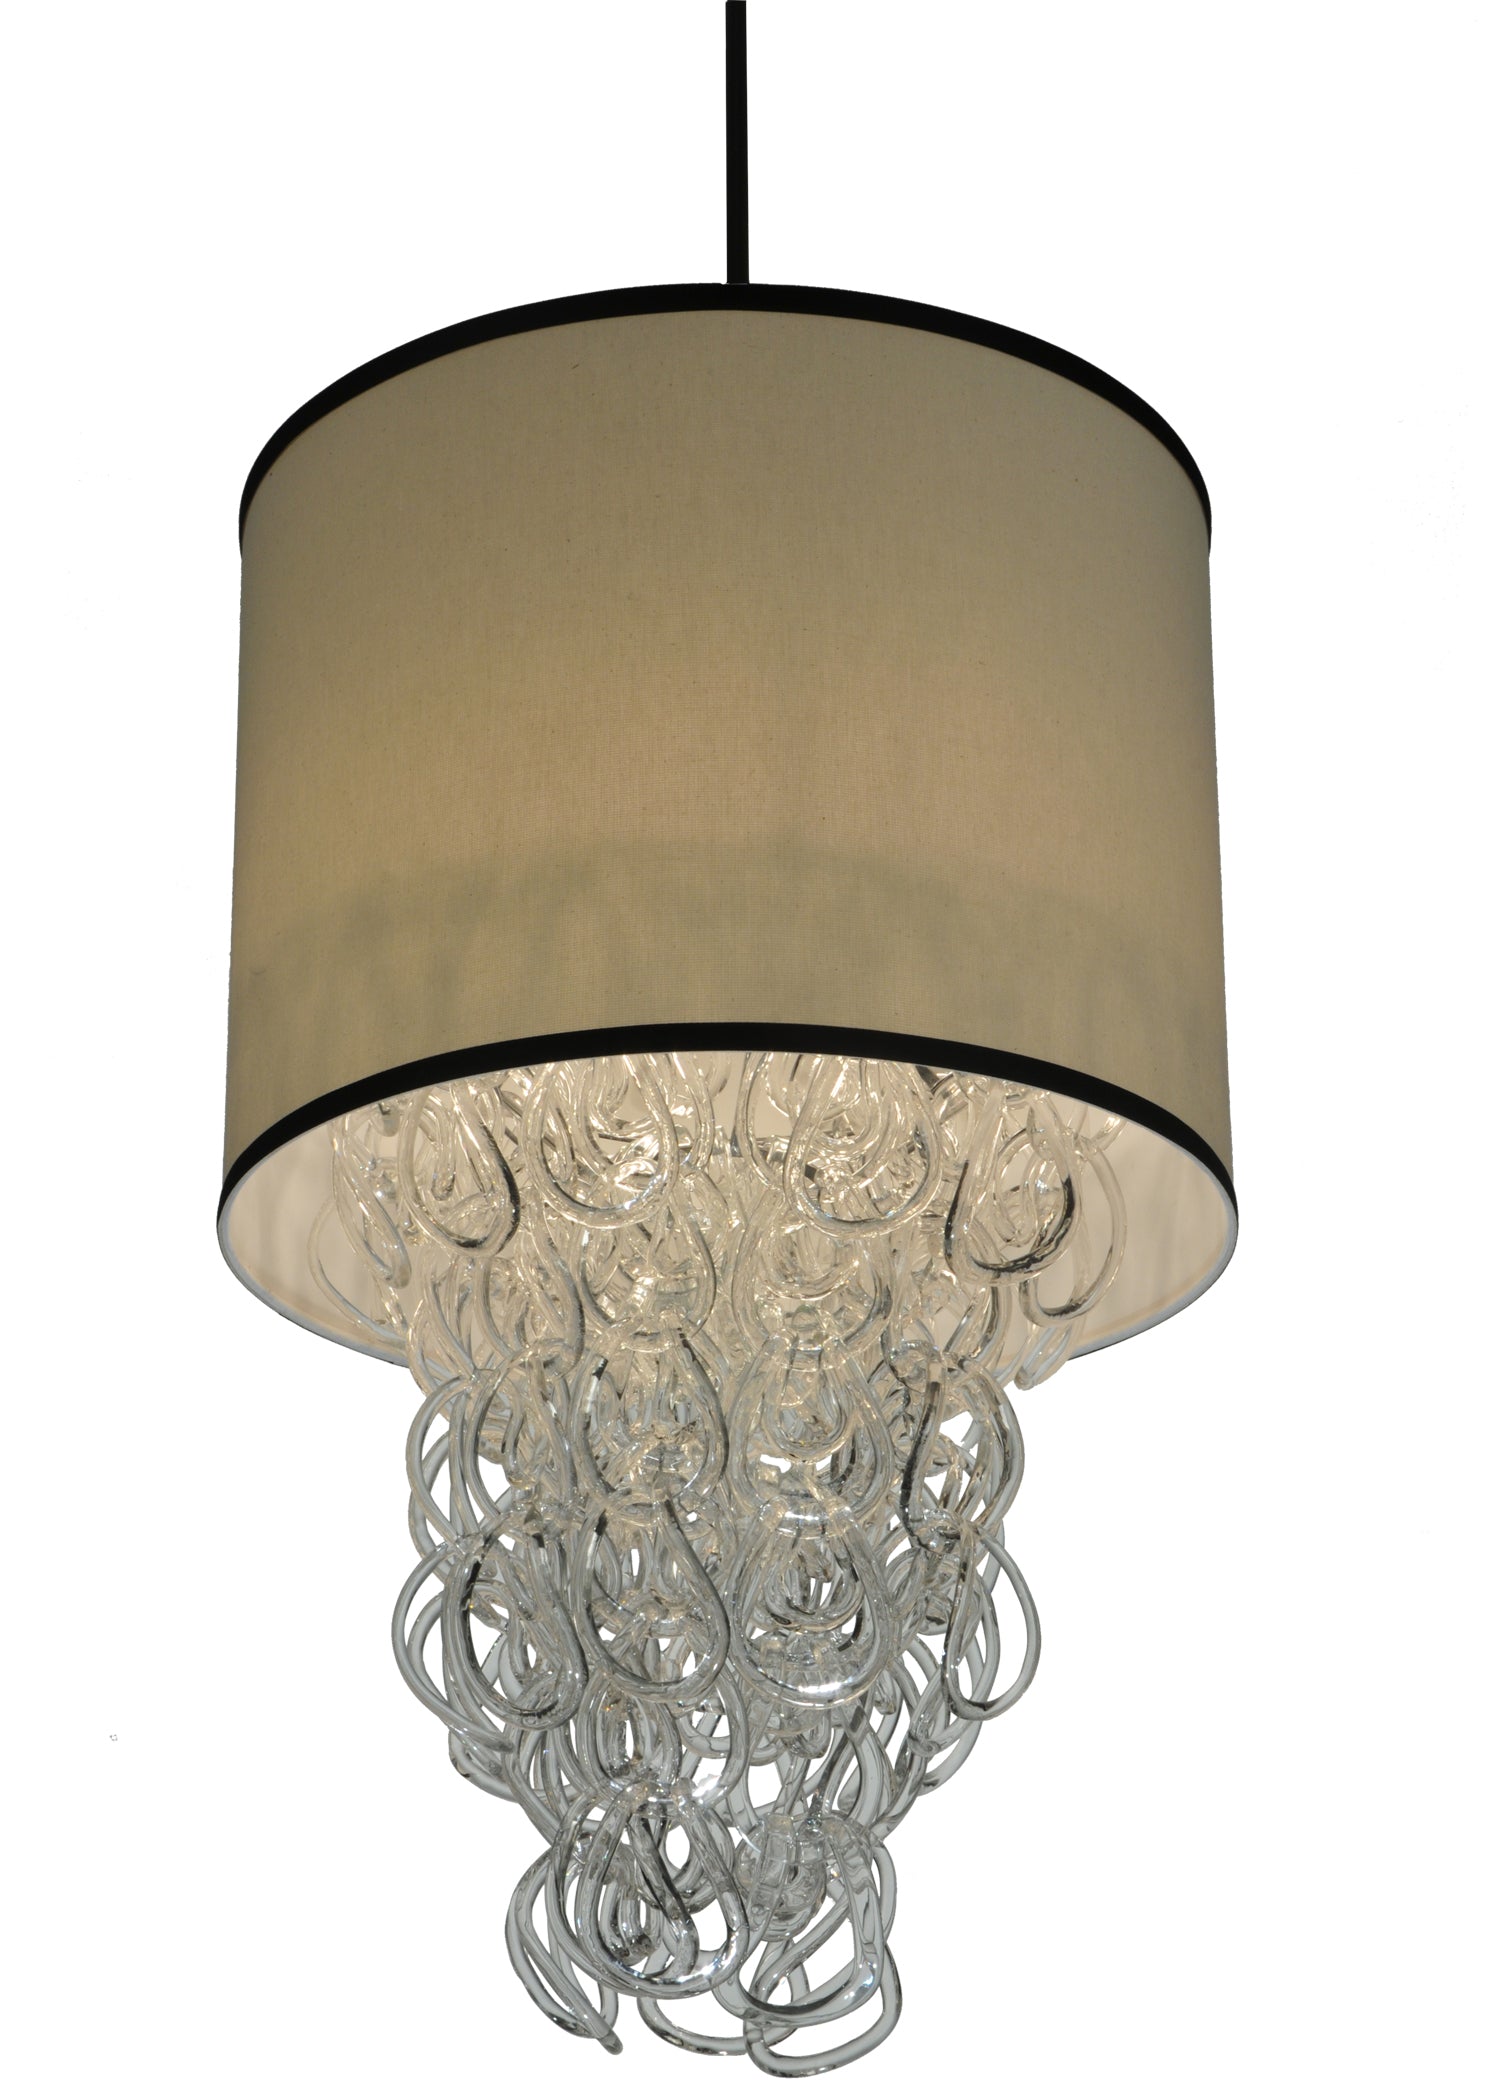 19" Lucy Pendant by 2nd Ave Lighting